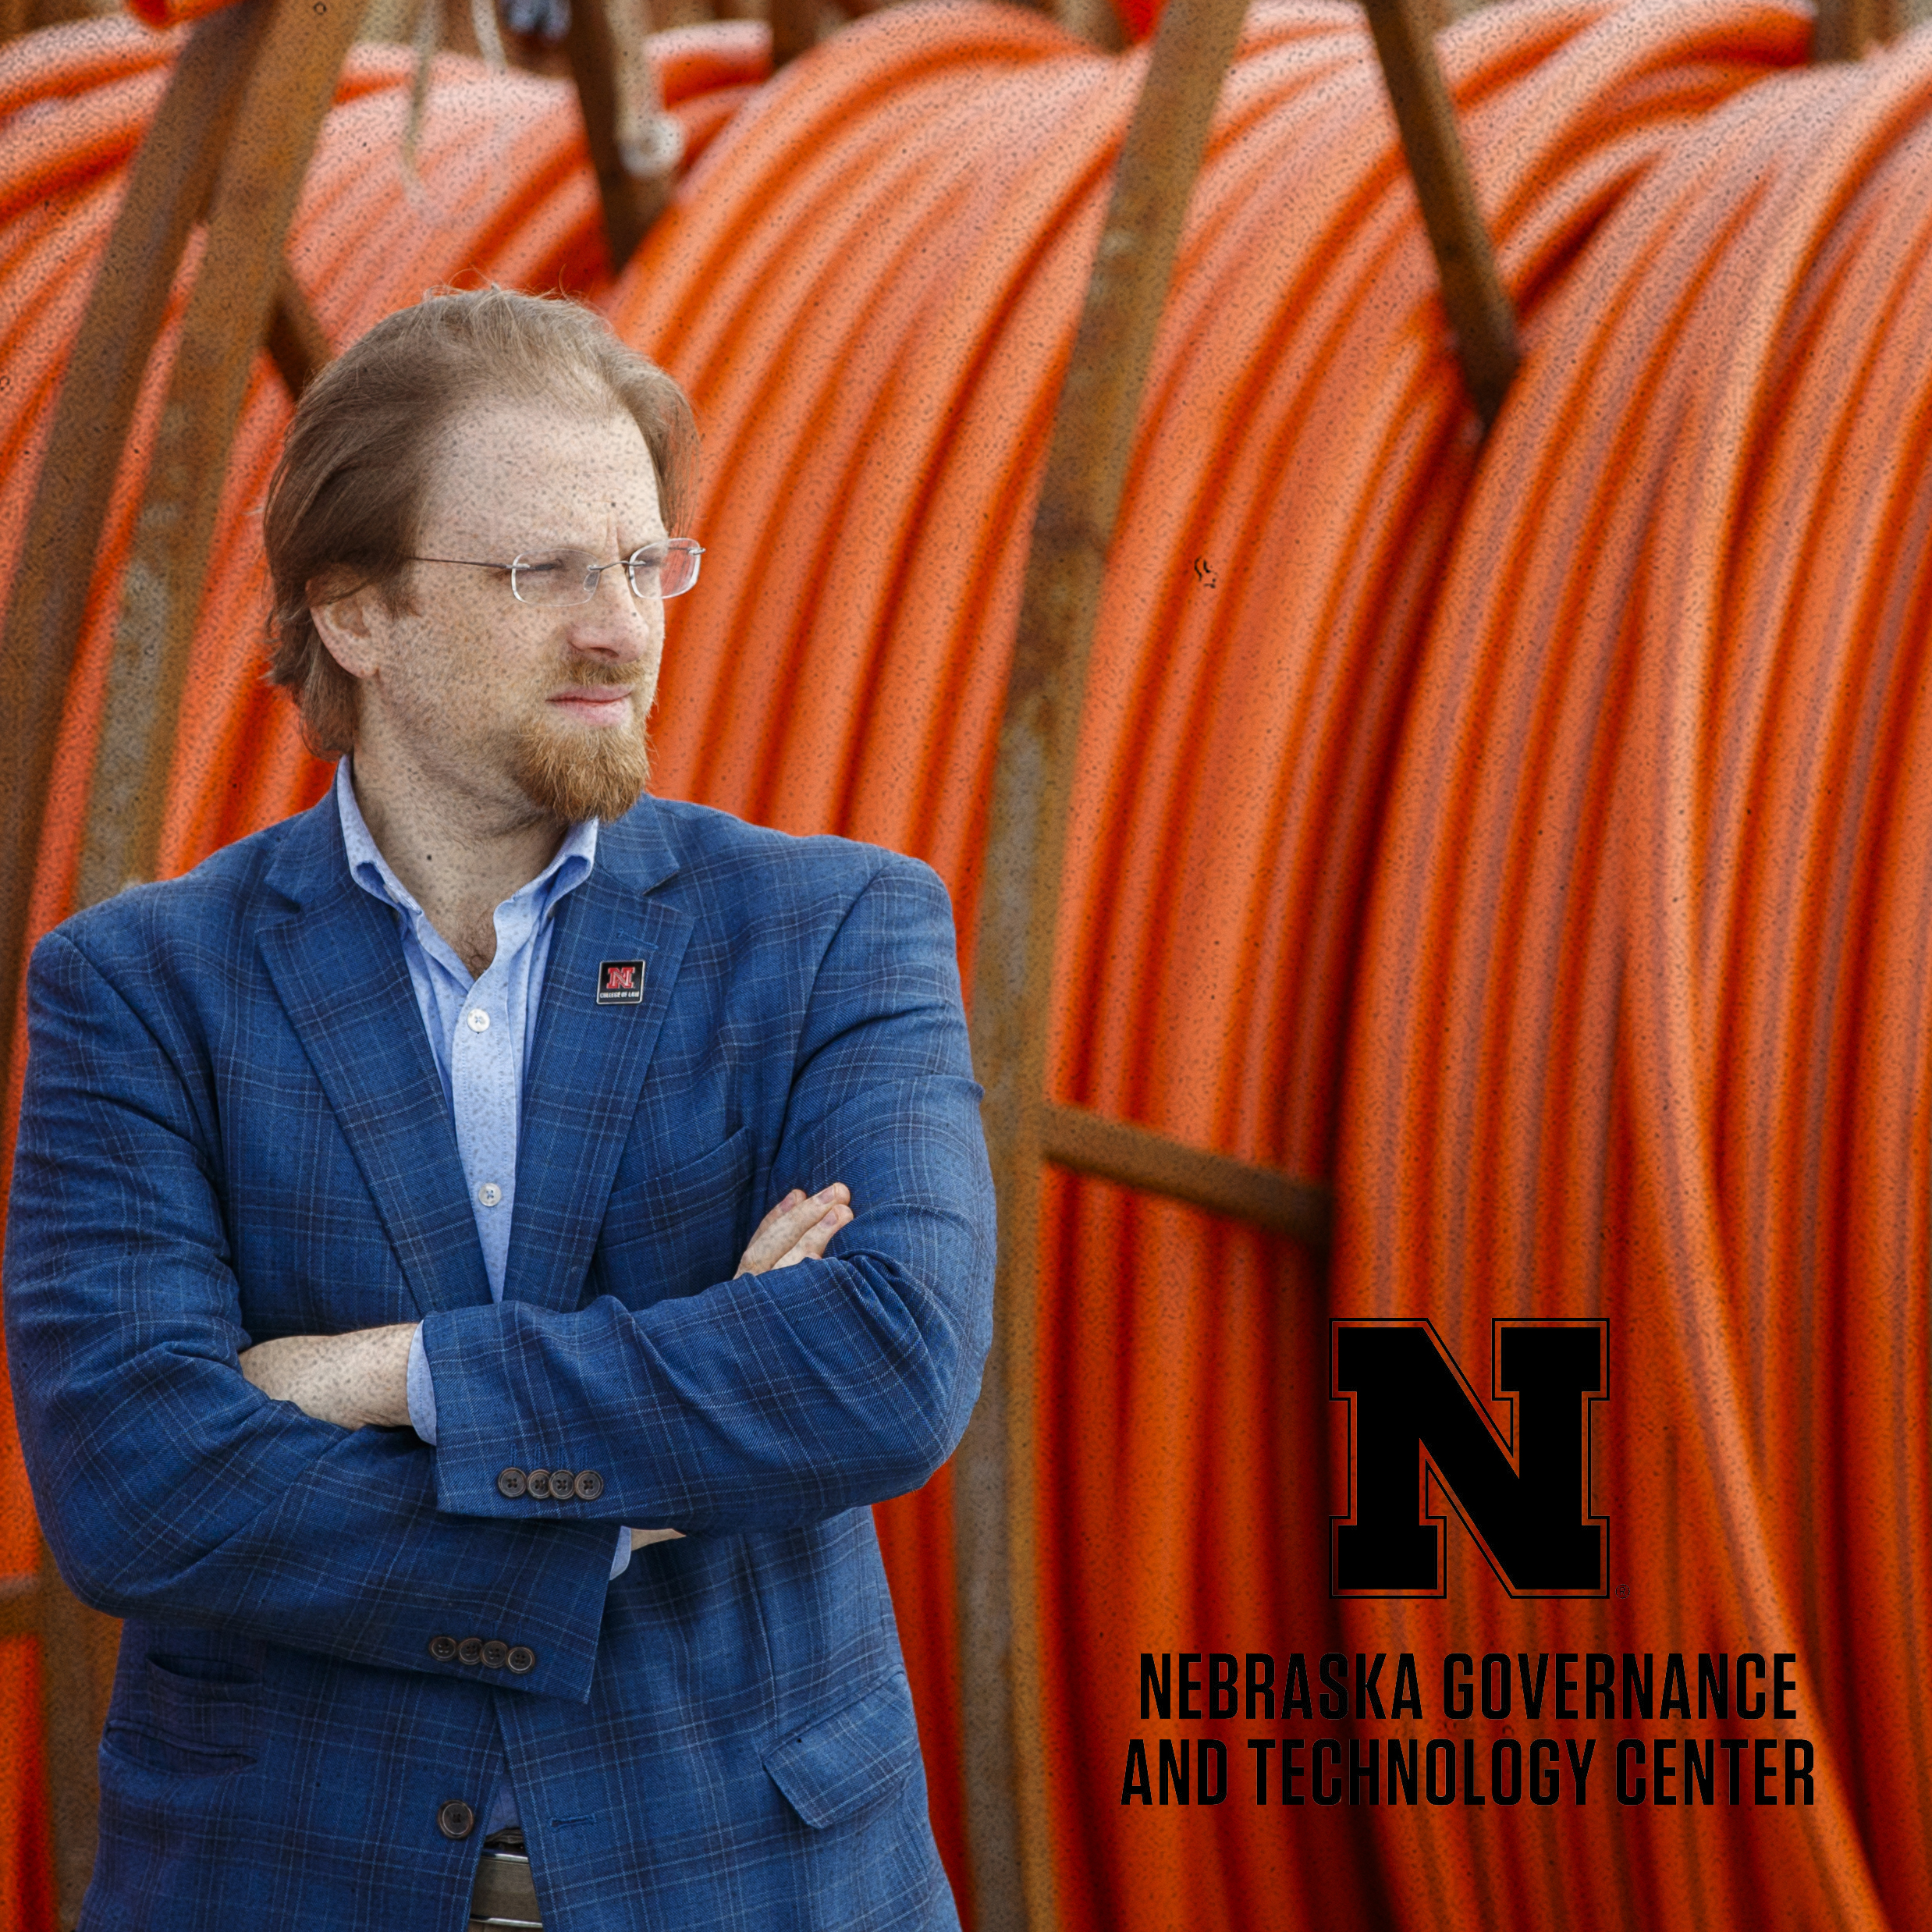 Portrait of Law Professor Gus Hurwitz in front of a large bundle of orange cables.